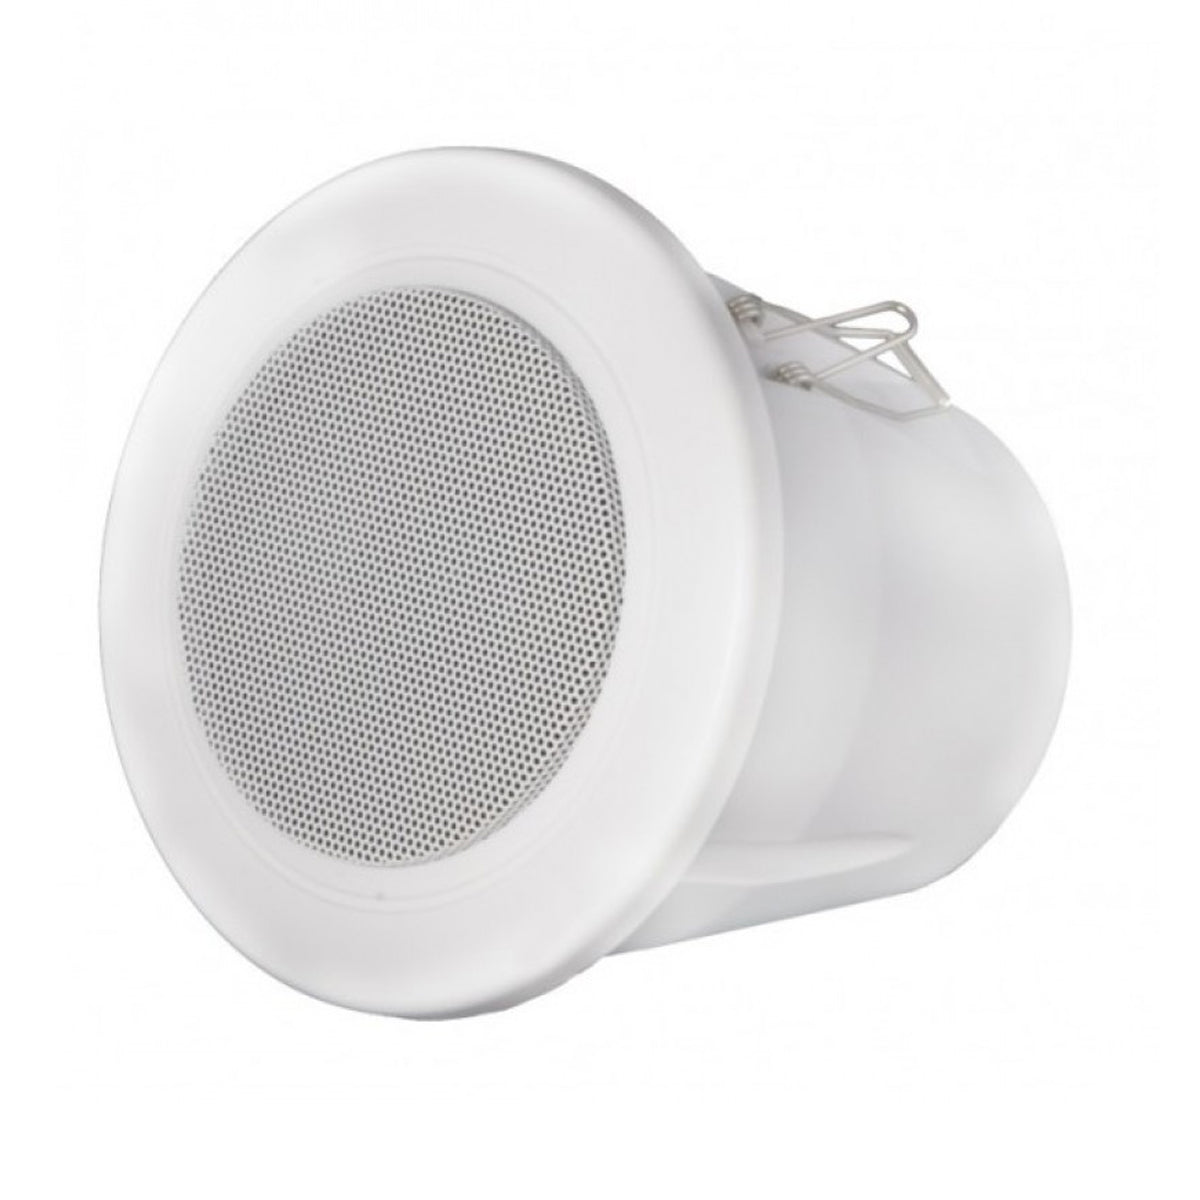 Audac AWP06/W SpringFit watepoof ceiling speaker 8ohm and 100V White version